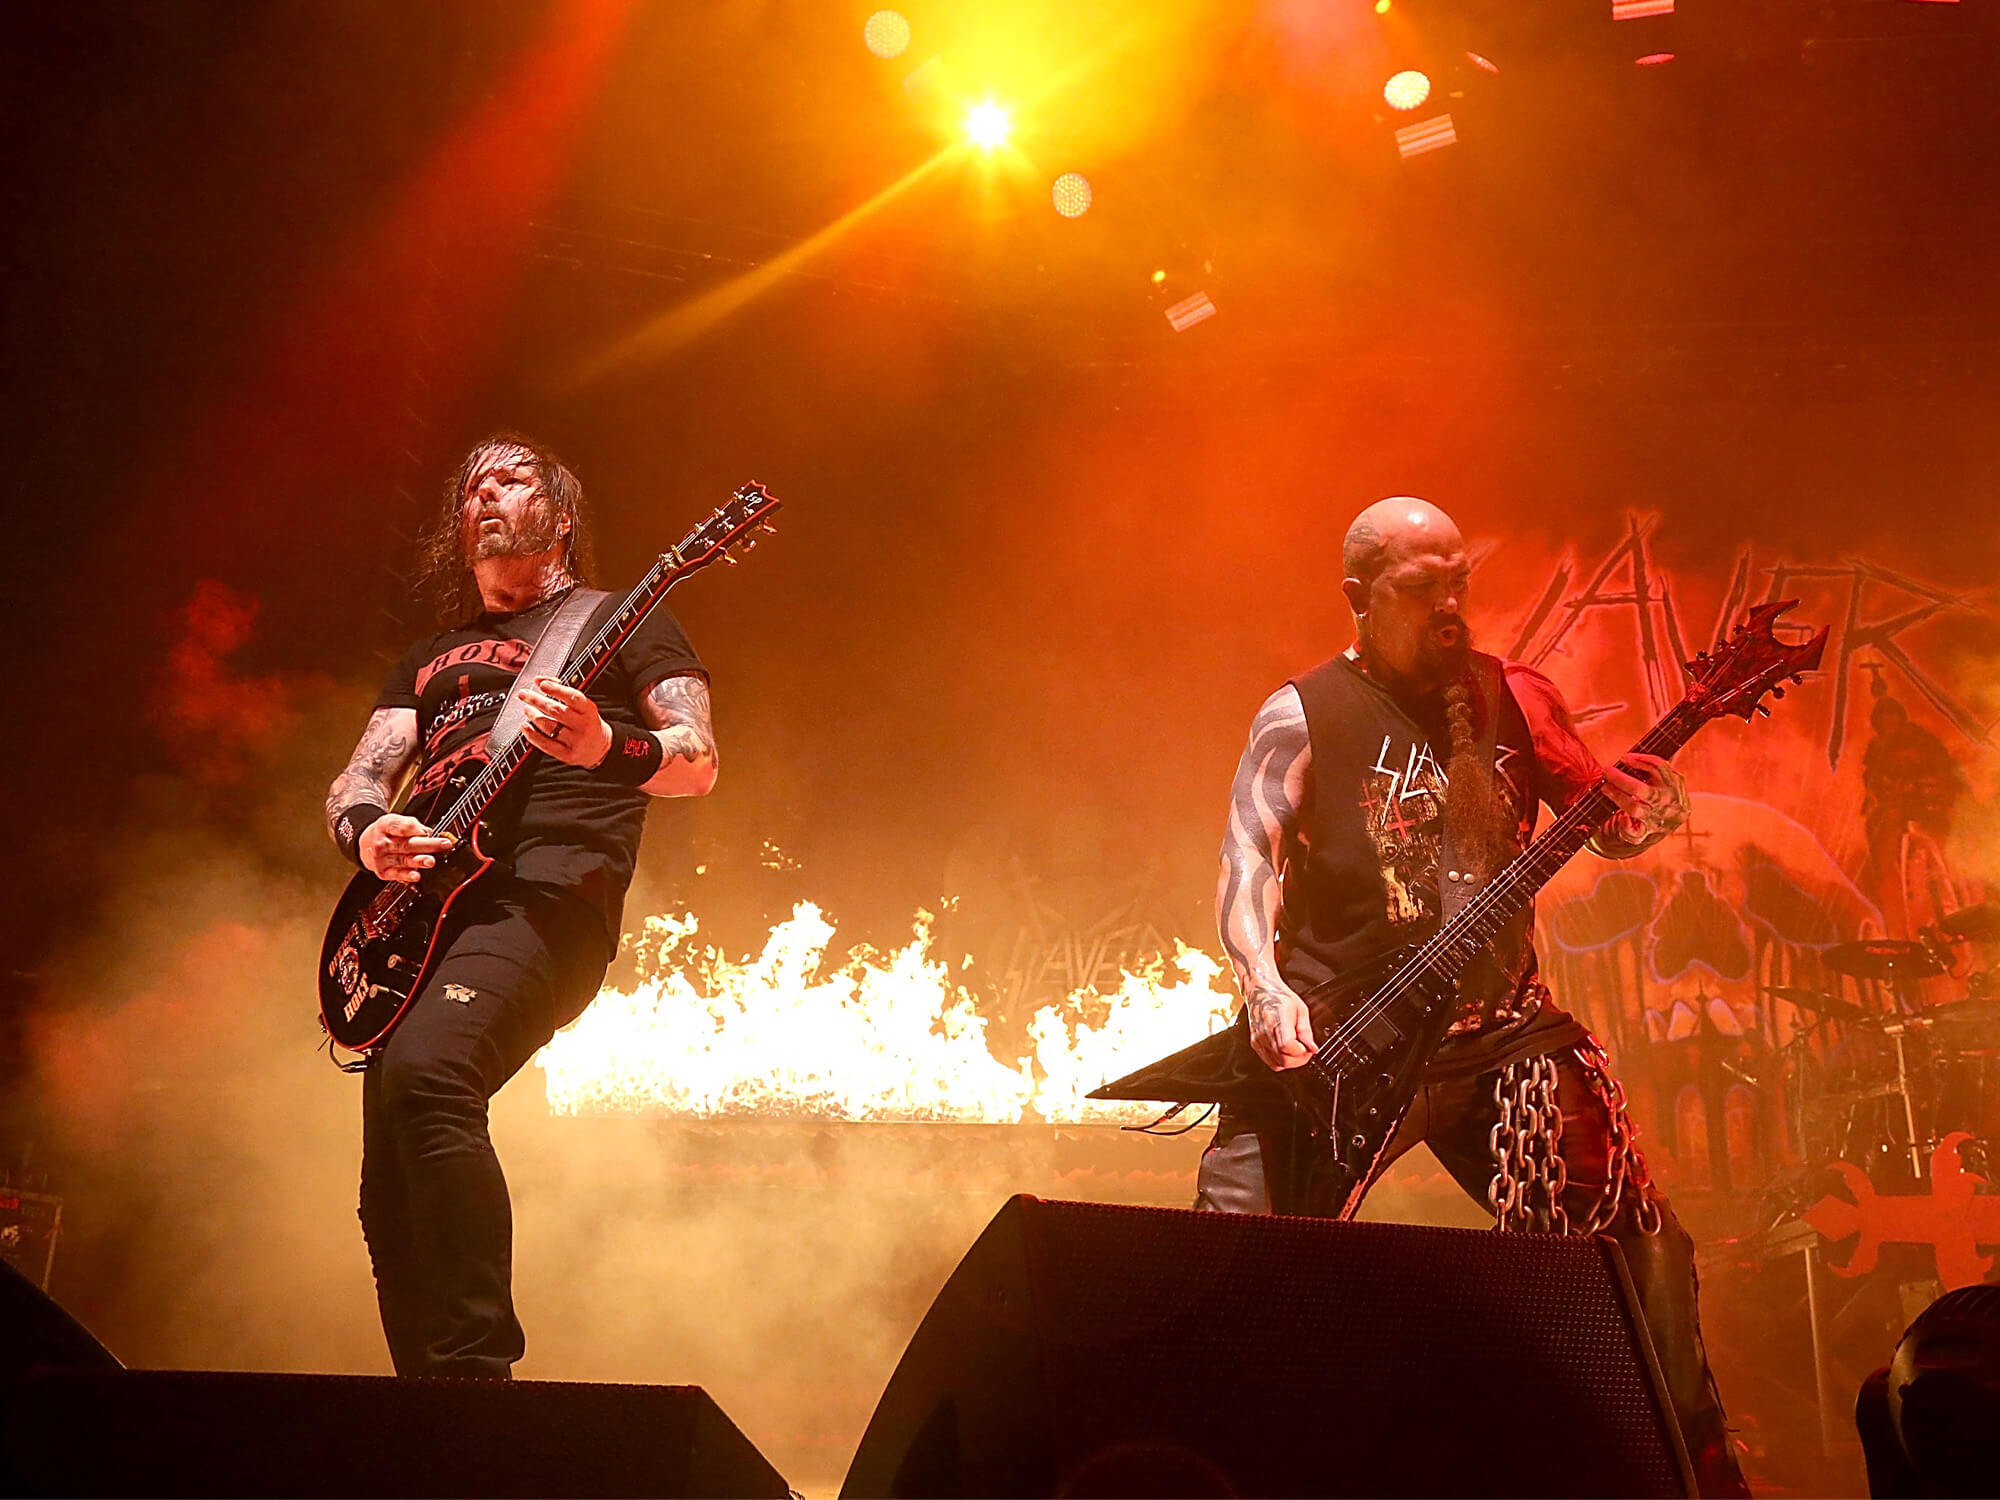 Gary Holt and Kerry King on stage in 2018. There are flames behind them.